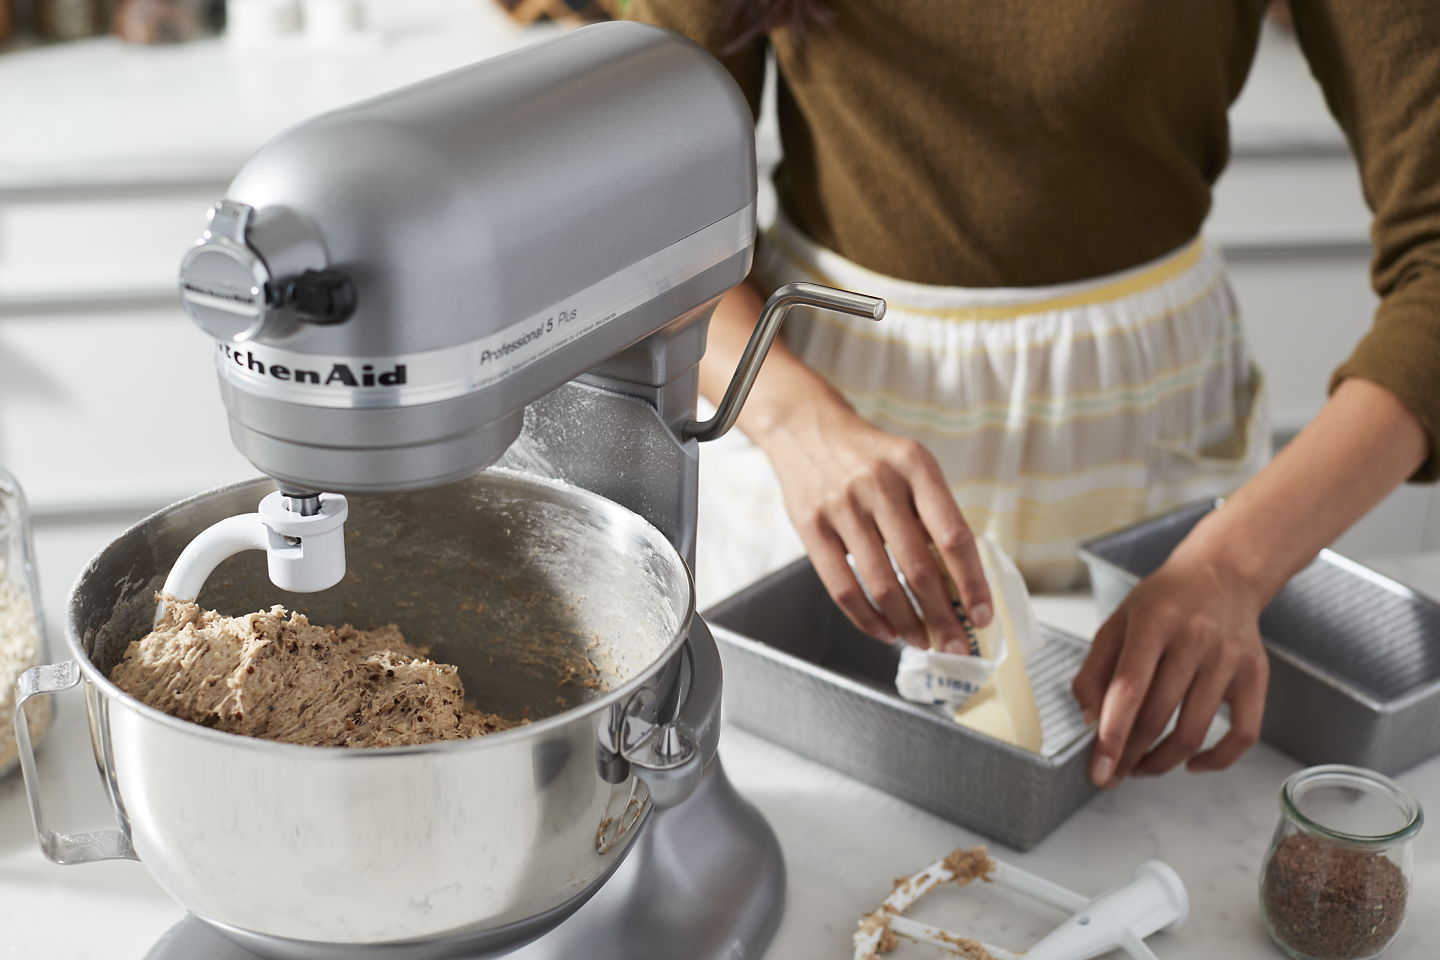 https://kitchenaid-h.assetsadobe.com/is/image/content/dam/business-unit/kitchenaid/en-us/marketing-content/site-assets/page-content/pinch-of-help/crusty-bread-stand-mixer-recipe/Crusty-Bread_2.png?fmt=png-alpha&qlt=85,0&resMode=sharp2&op_usm=1.75,0.3,2,0&scl=1&constrain=fit,1